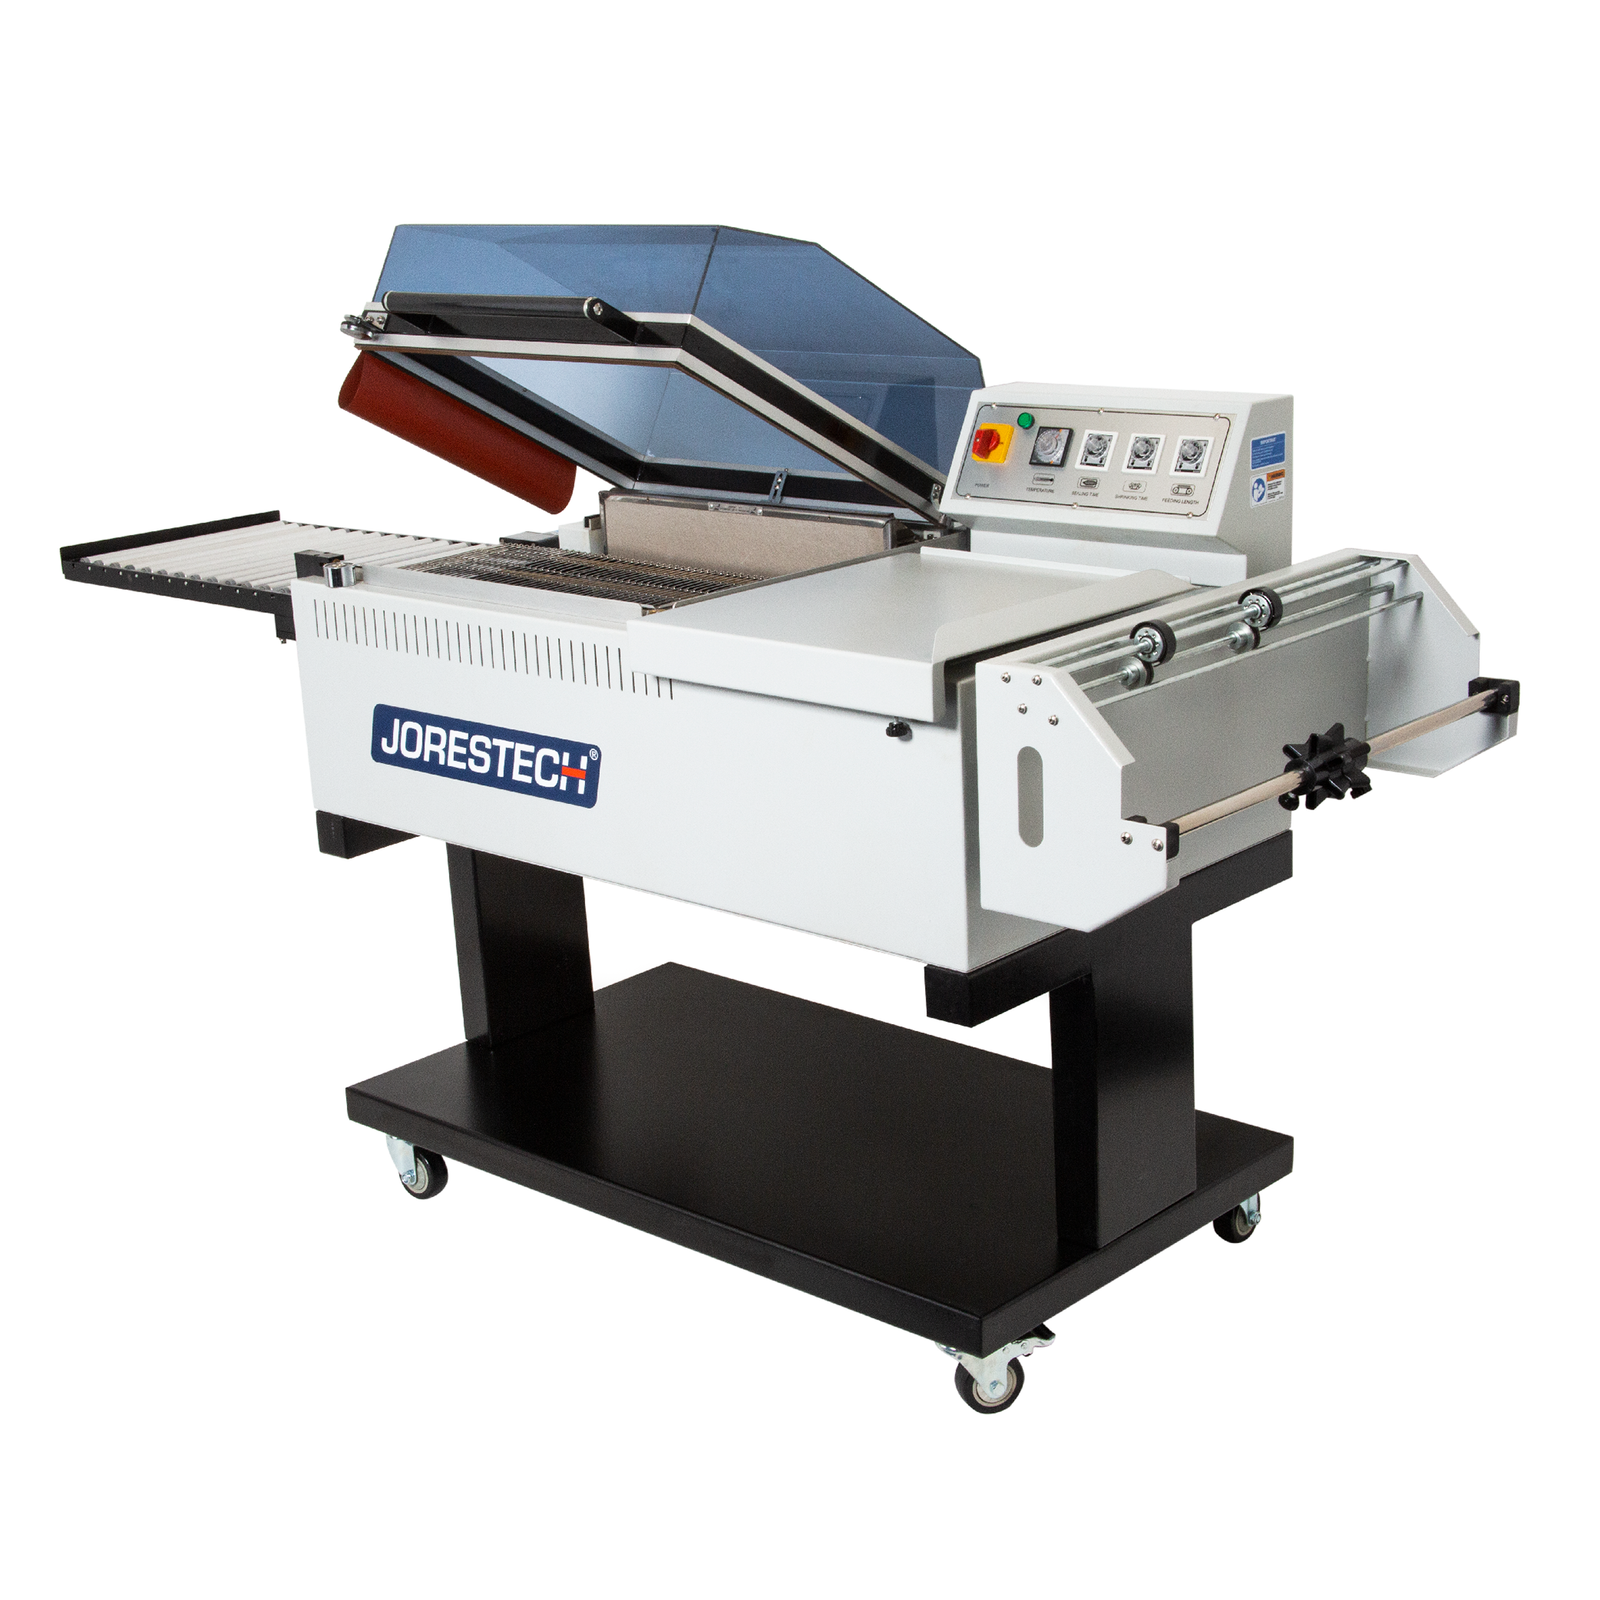 https://technopackcorp.com/cdn/shop/products/CHAMBER-SHRINK-WRAPPING-SEALING-SYSTEM-WITH-DISPENSER-_-MESH-CONVEYOR-22X20-INCHES-E-FM-5540-A-JORESTECH-H-01_1600x1600.png?v=1622581937